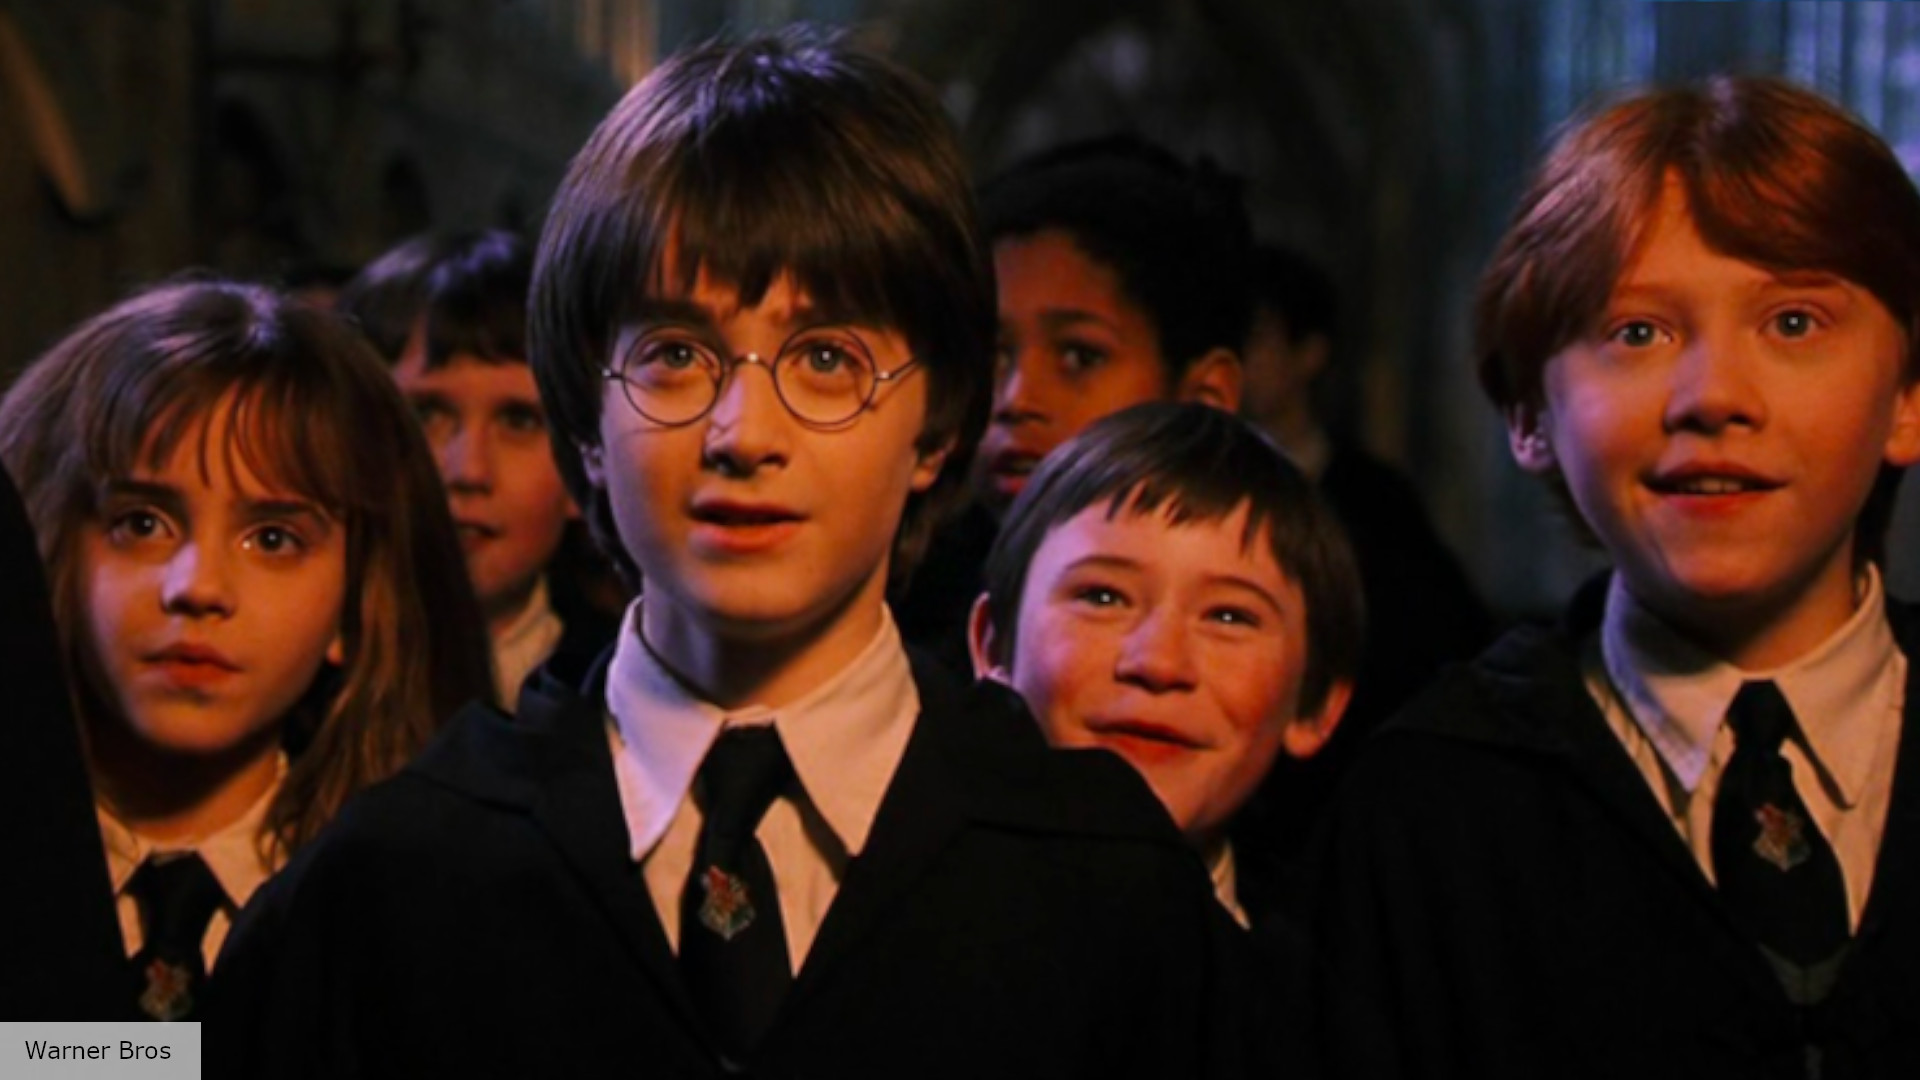 Harry Potter TV series: Expected release date, story, cast and more